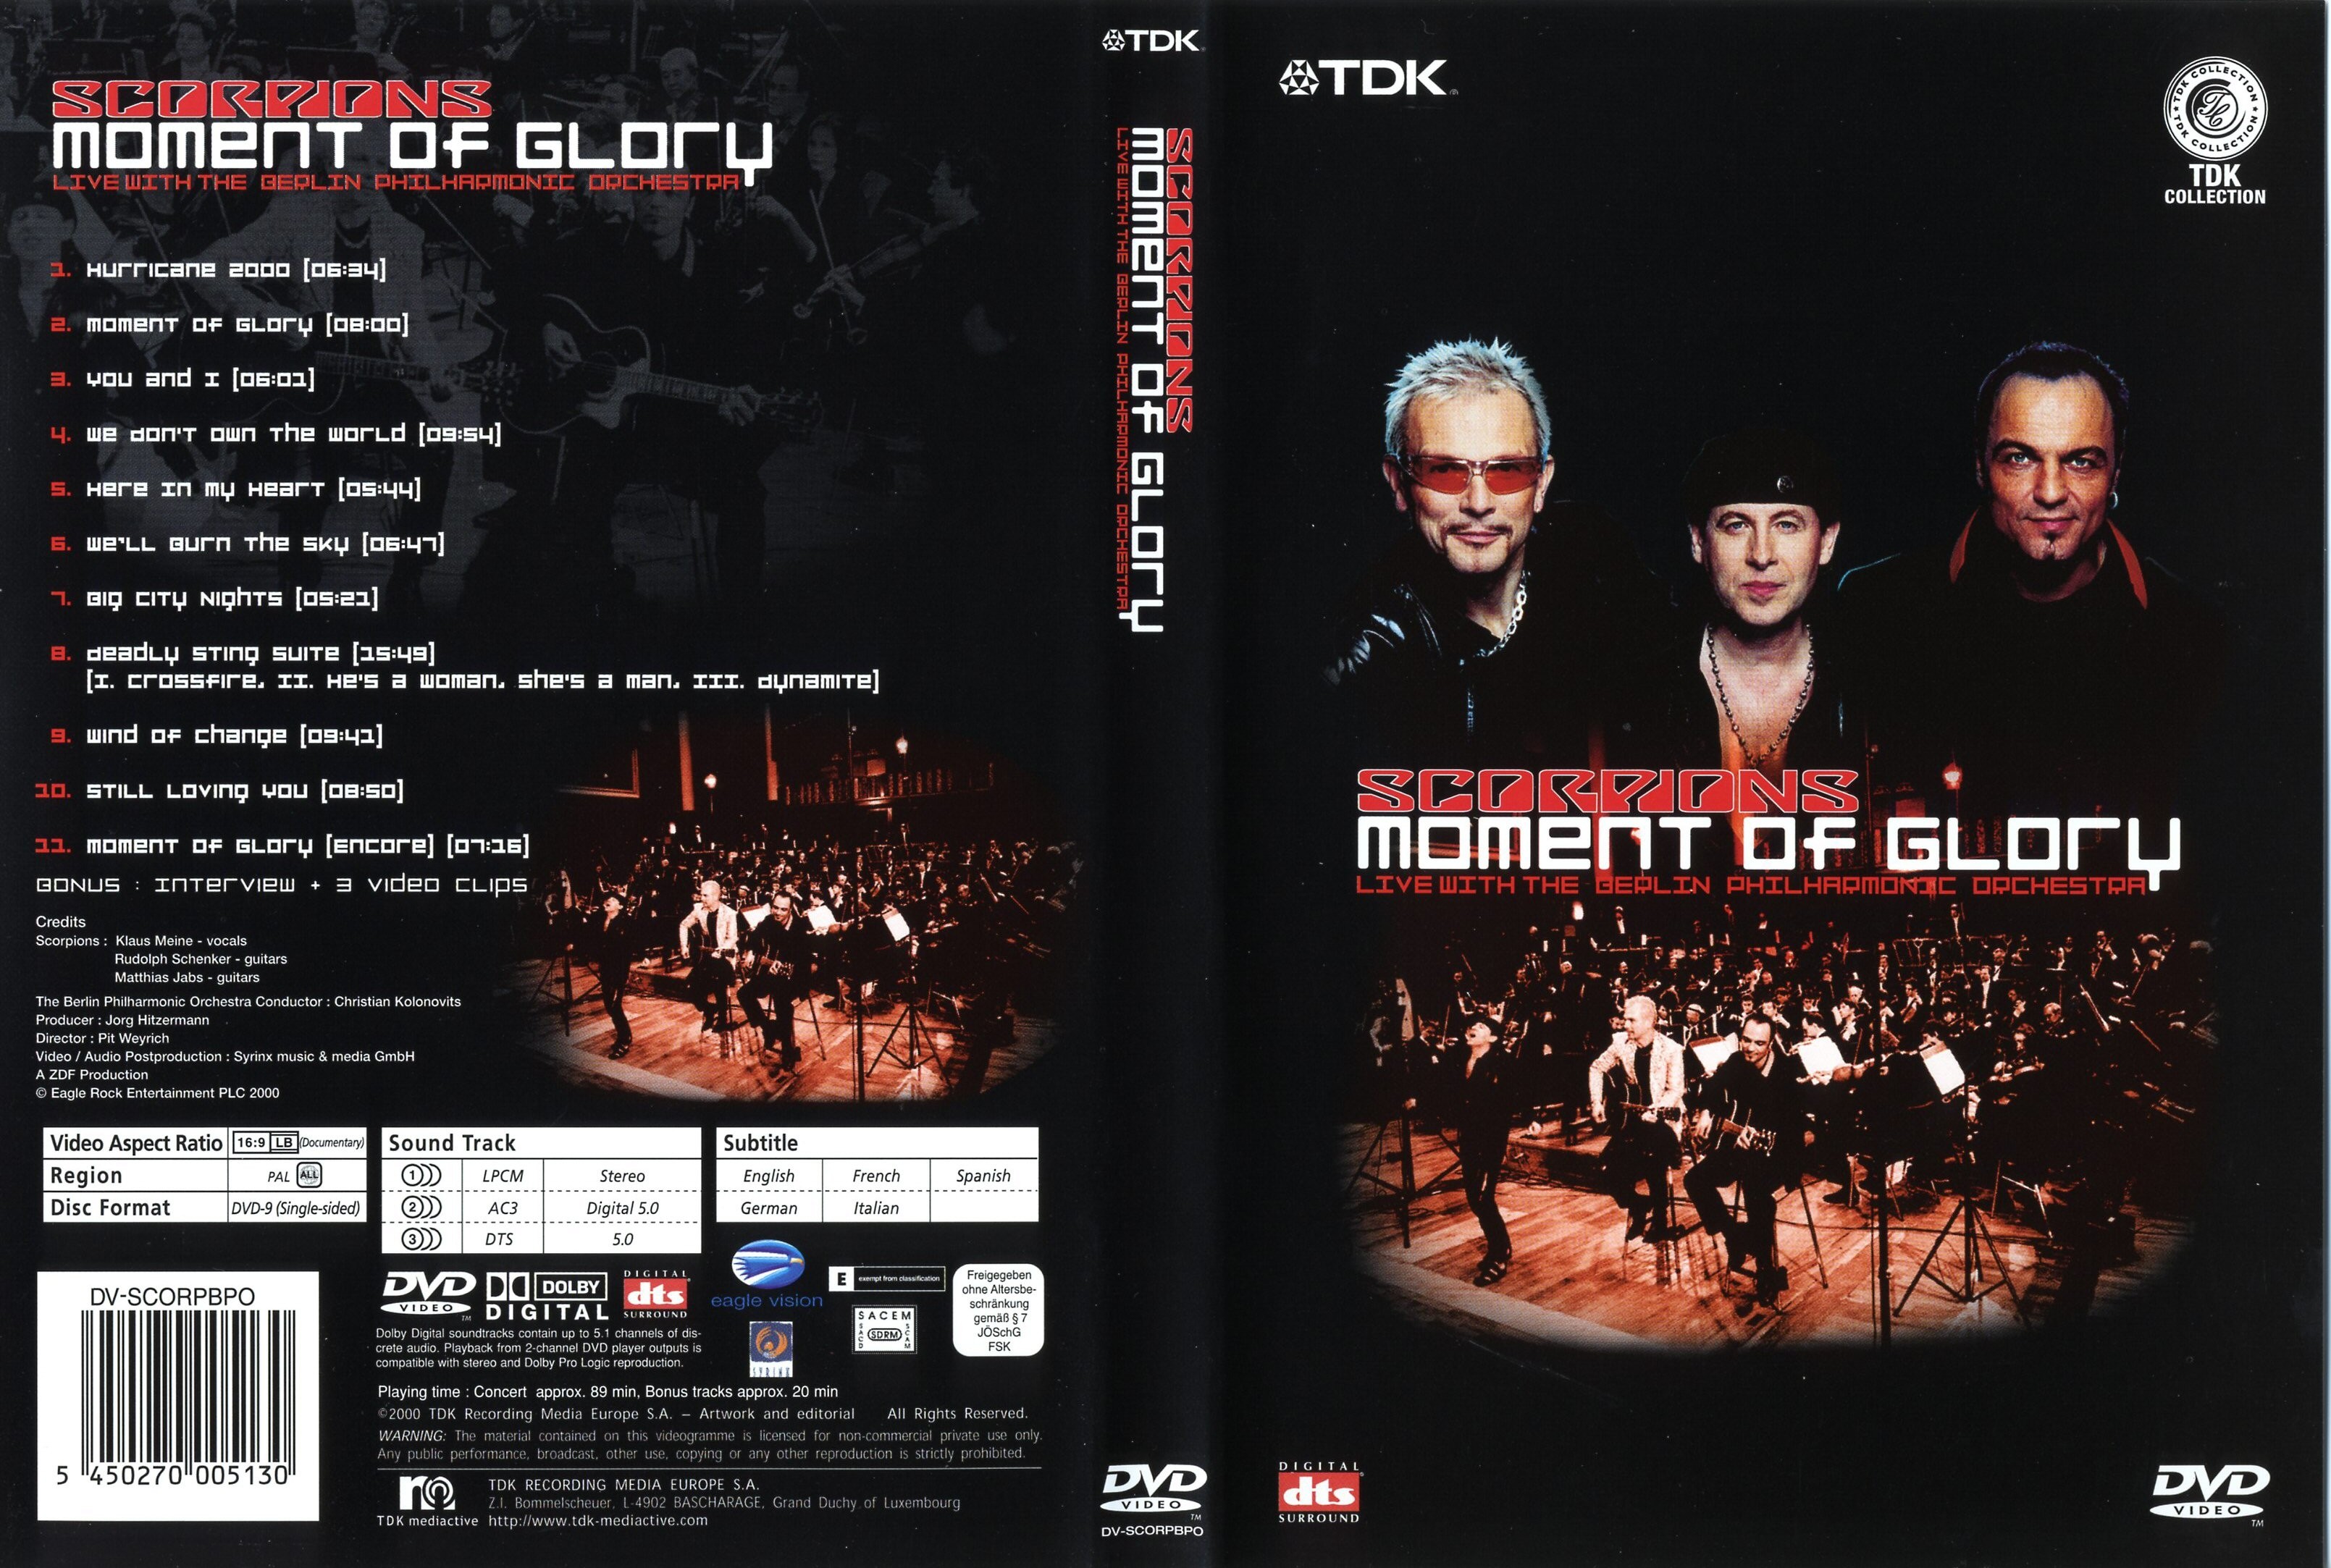 Jaquette DVD Scorpions - Moment of glory